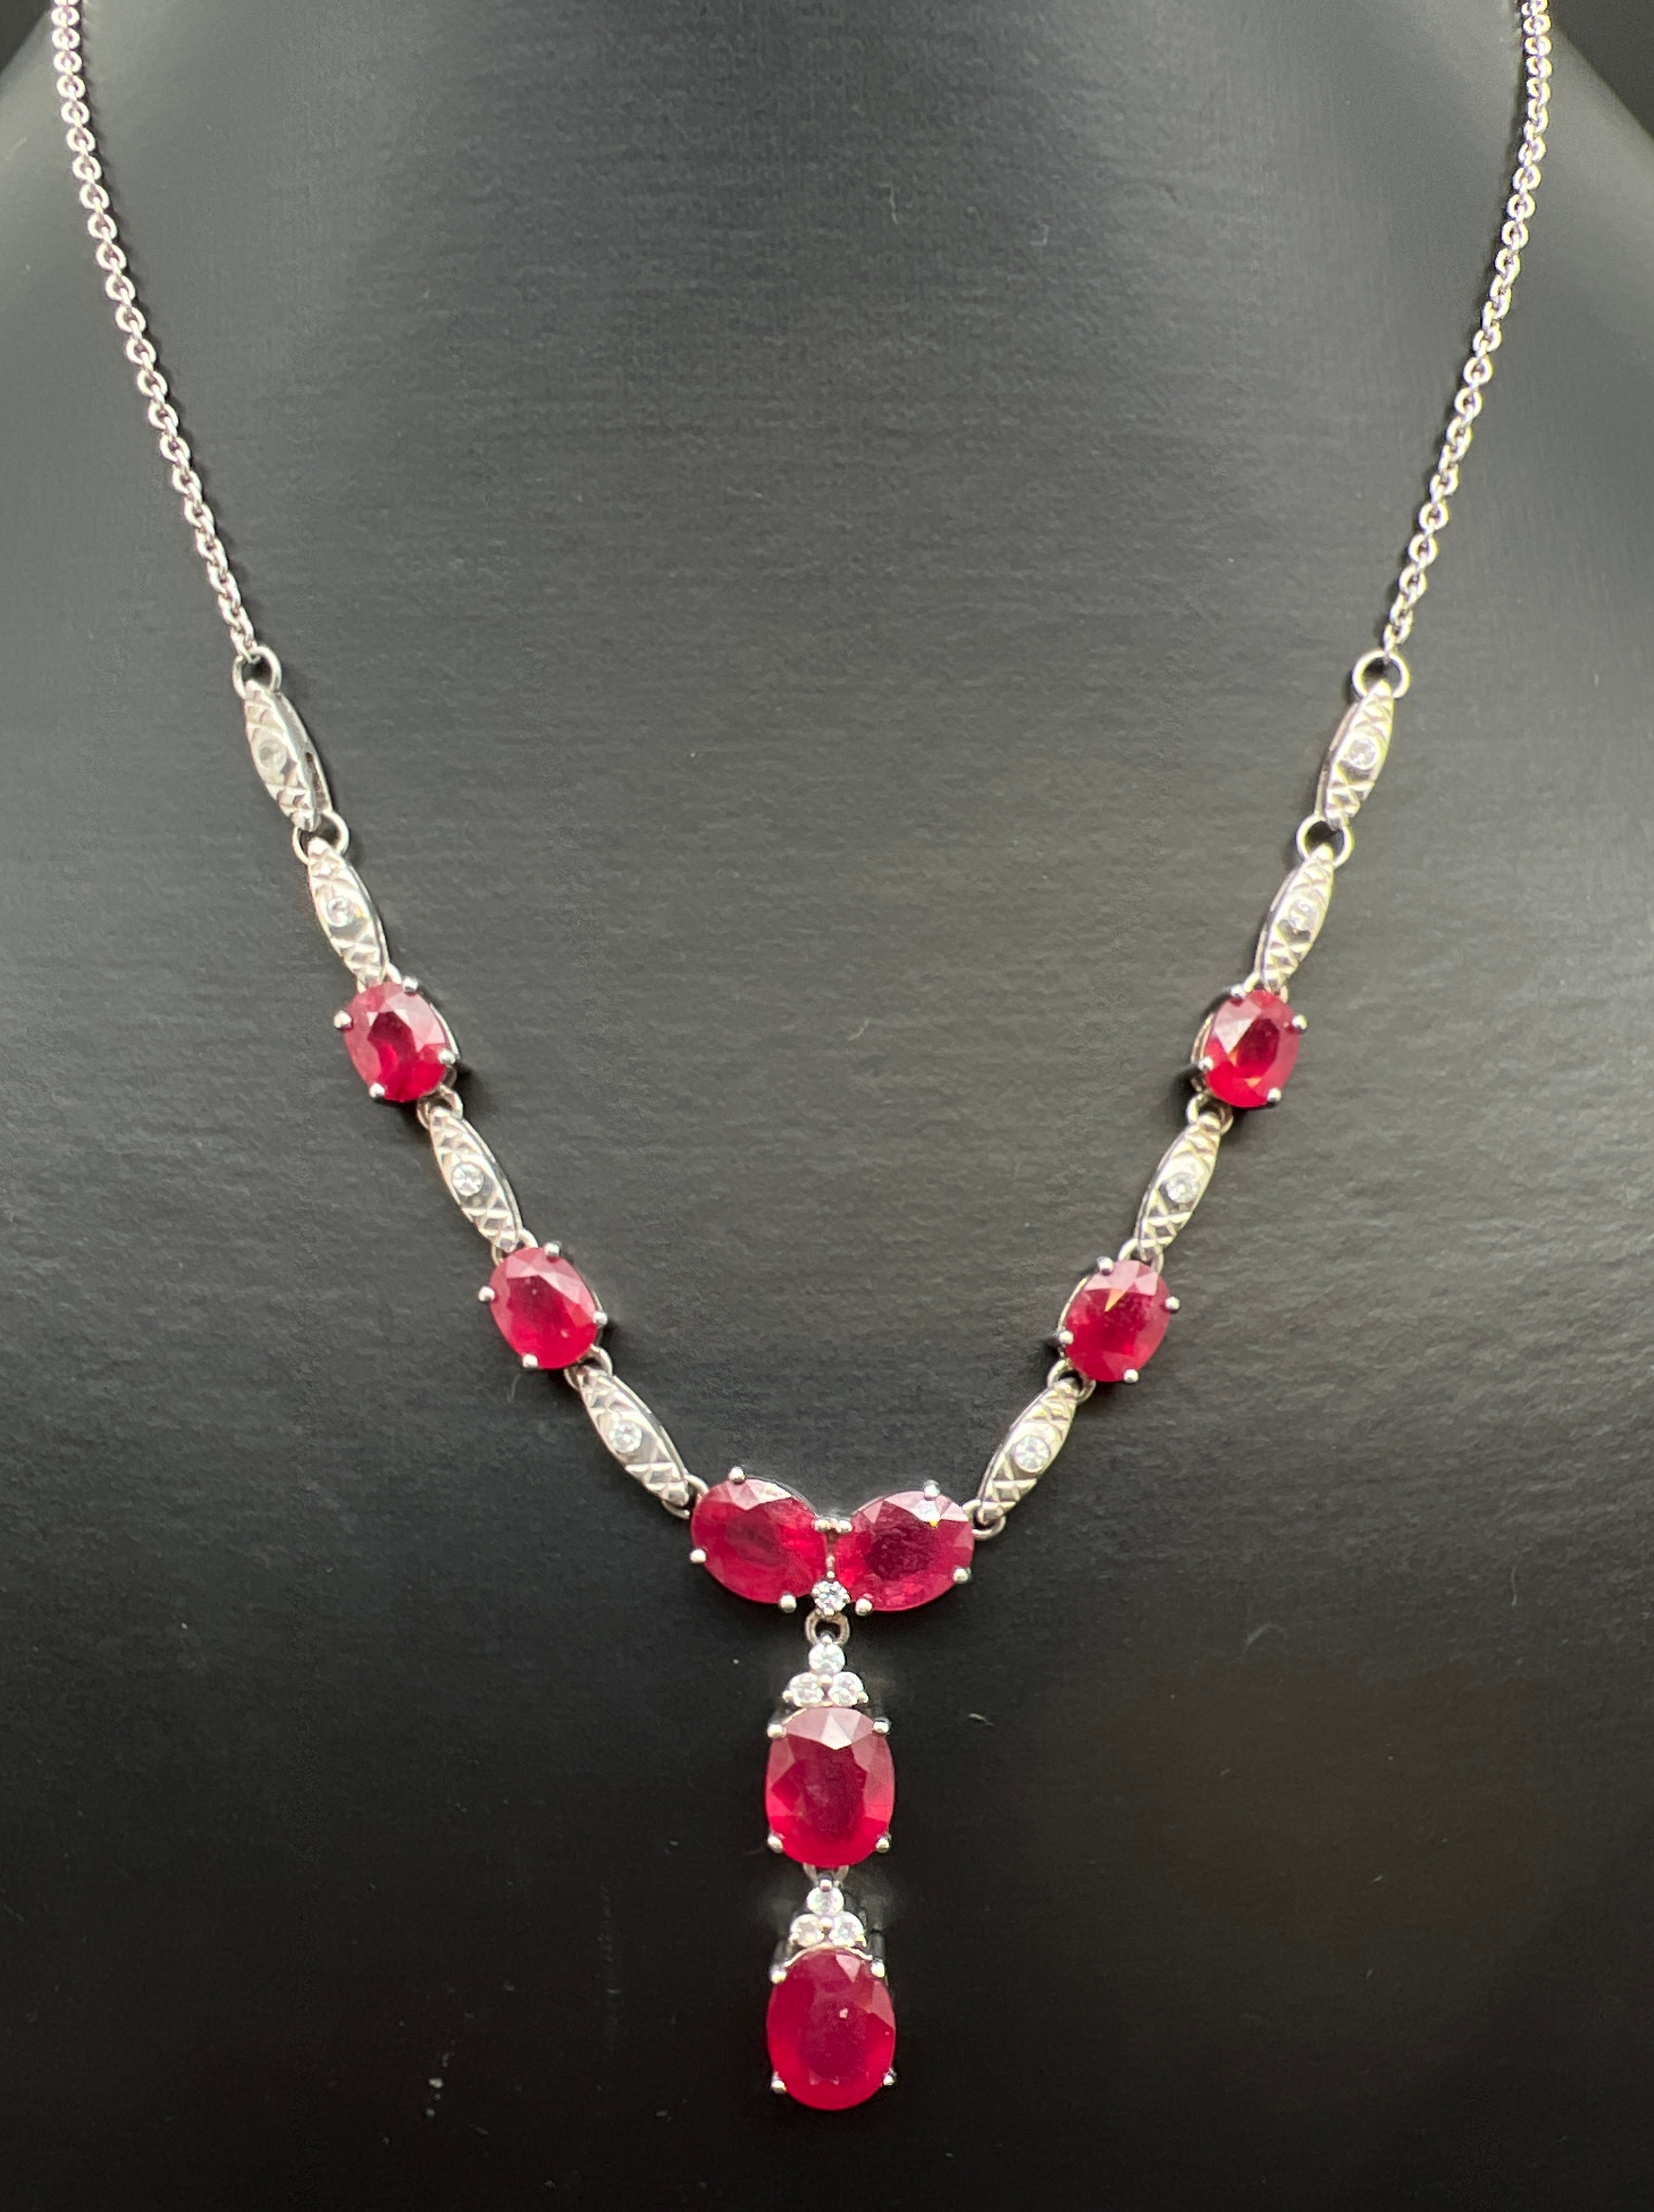 A silver ruby and white topaz fixed drop pendant necklace with spring ring clasp, by The Genuine Gem